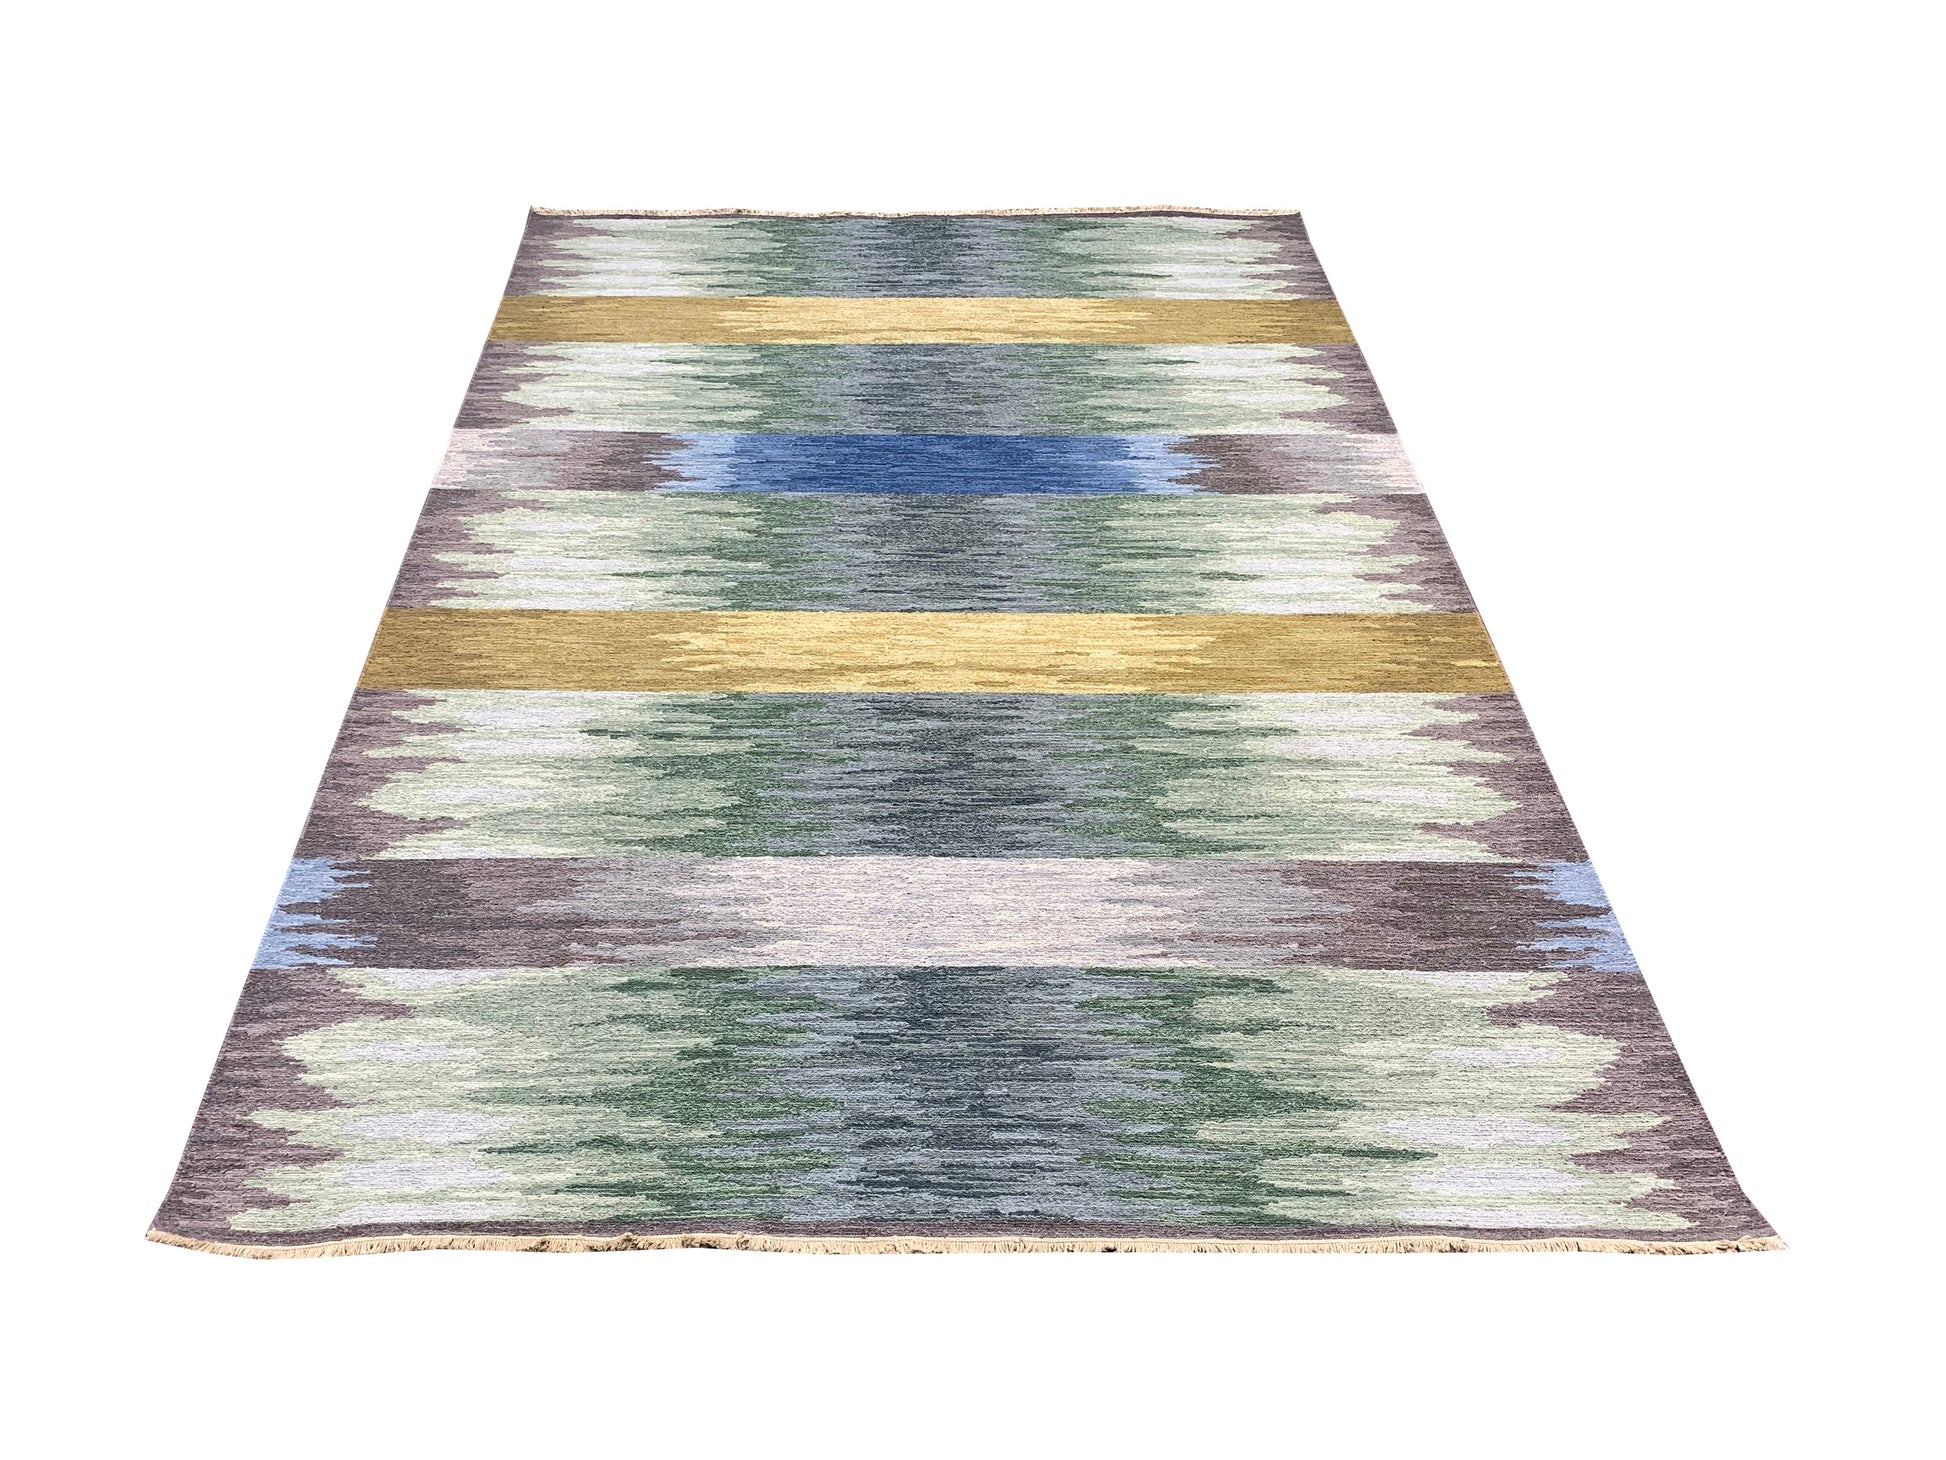 Get trendy with Grey Pure Wool Modern Soumak Area Rug 6.1x8.11ft 186x272Cms - Modern Rugs available at Jaipur Oriental Rugs. Grab yours for $545.00 today!